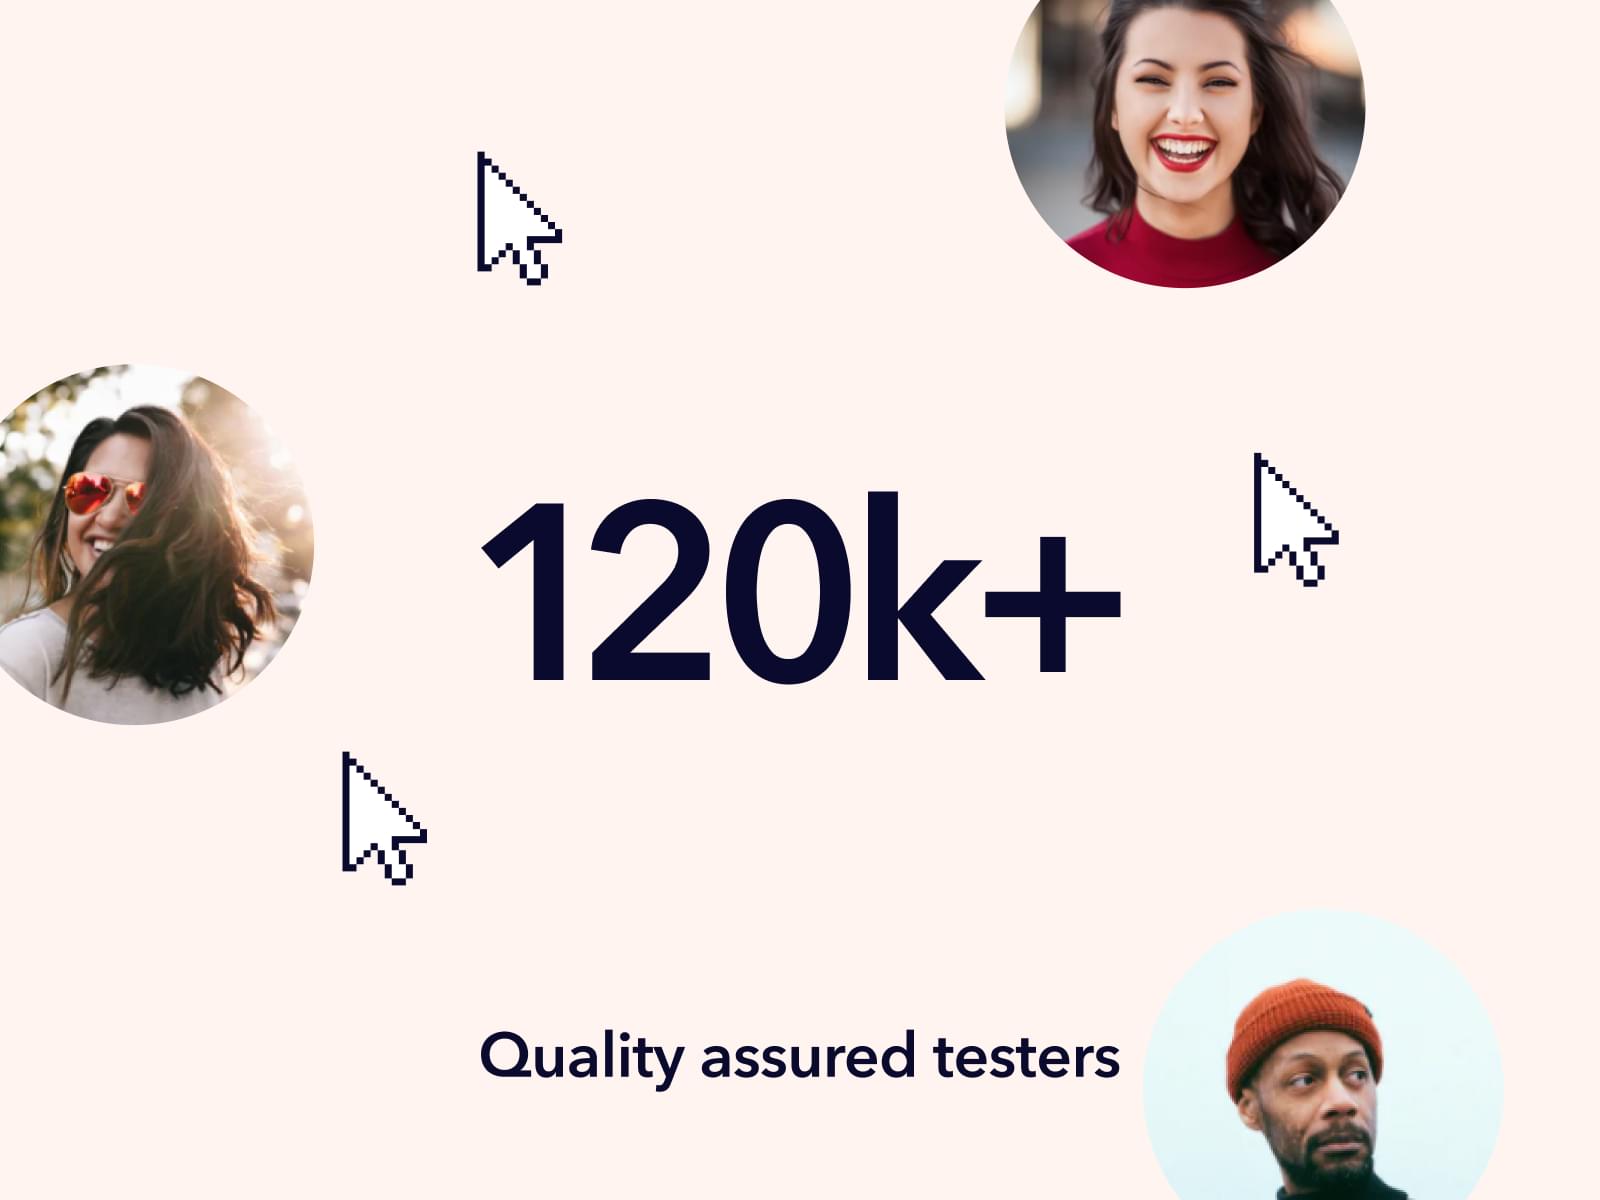 More than 120k+ Quality Assured Testers